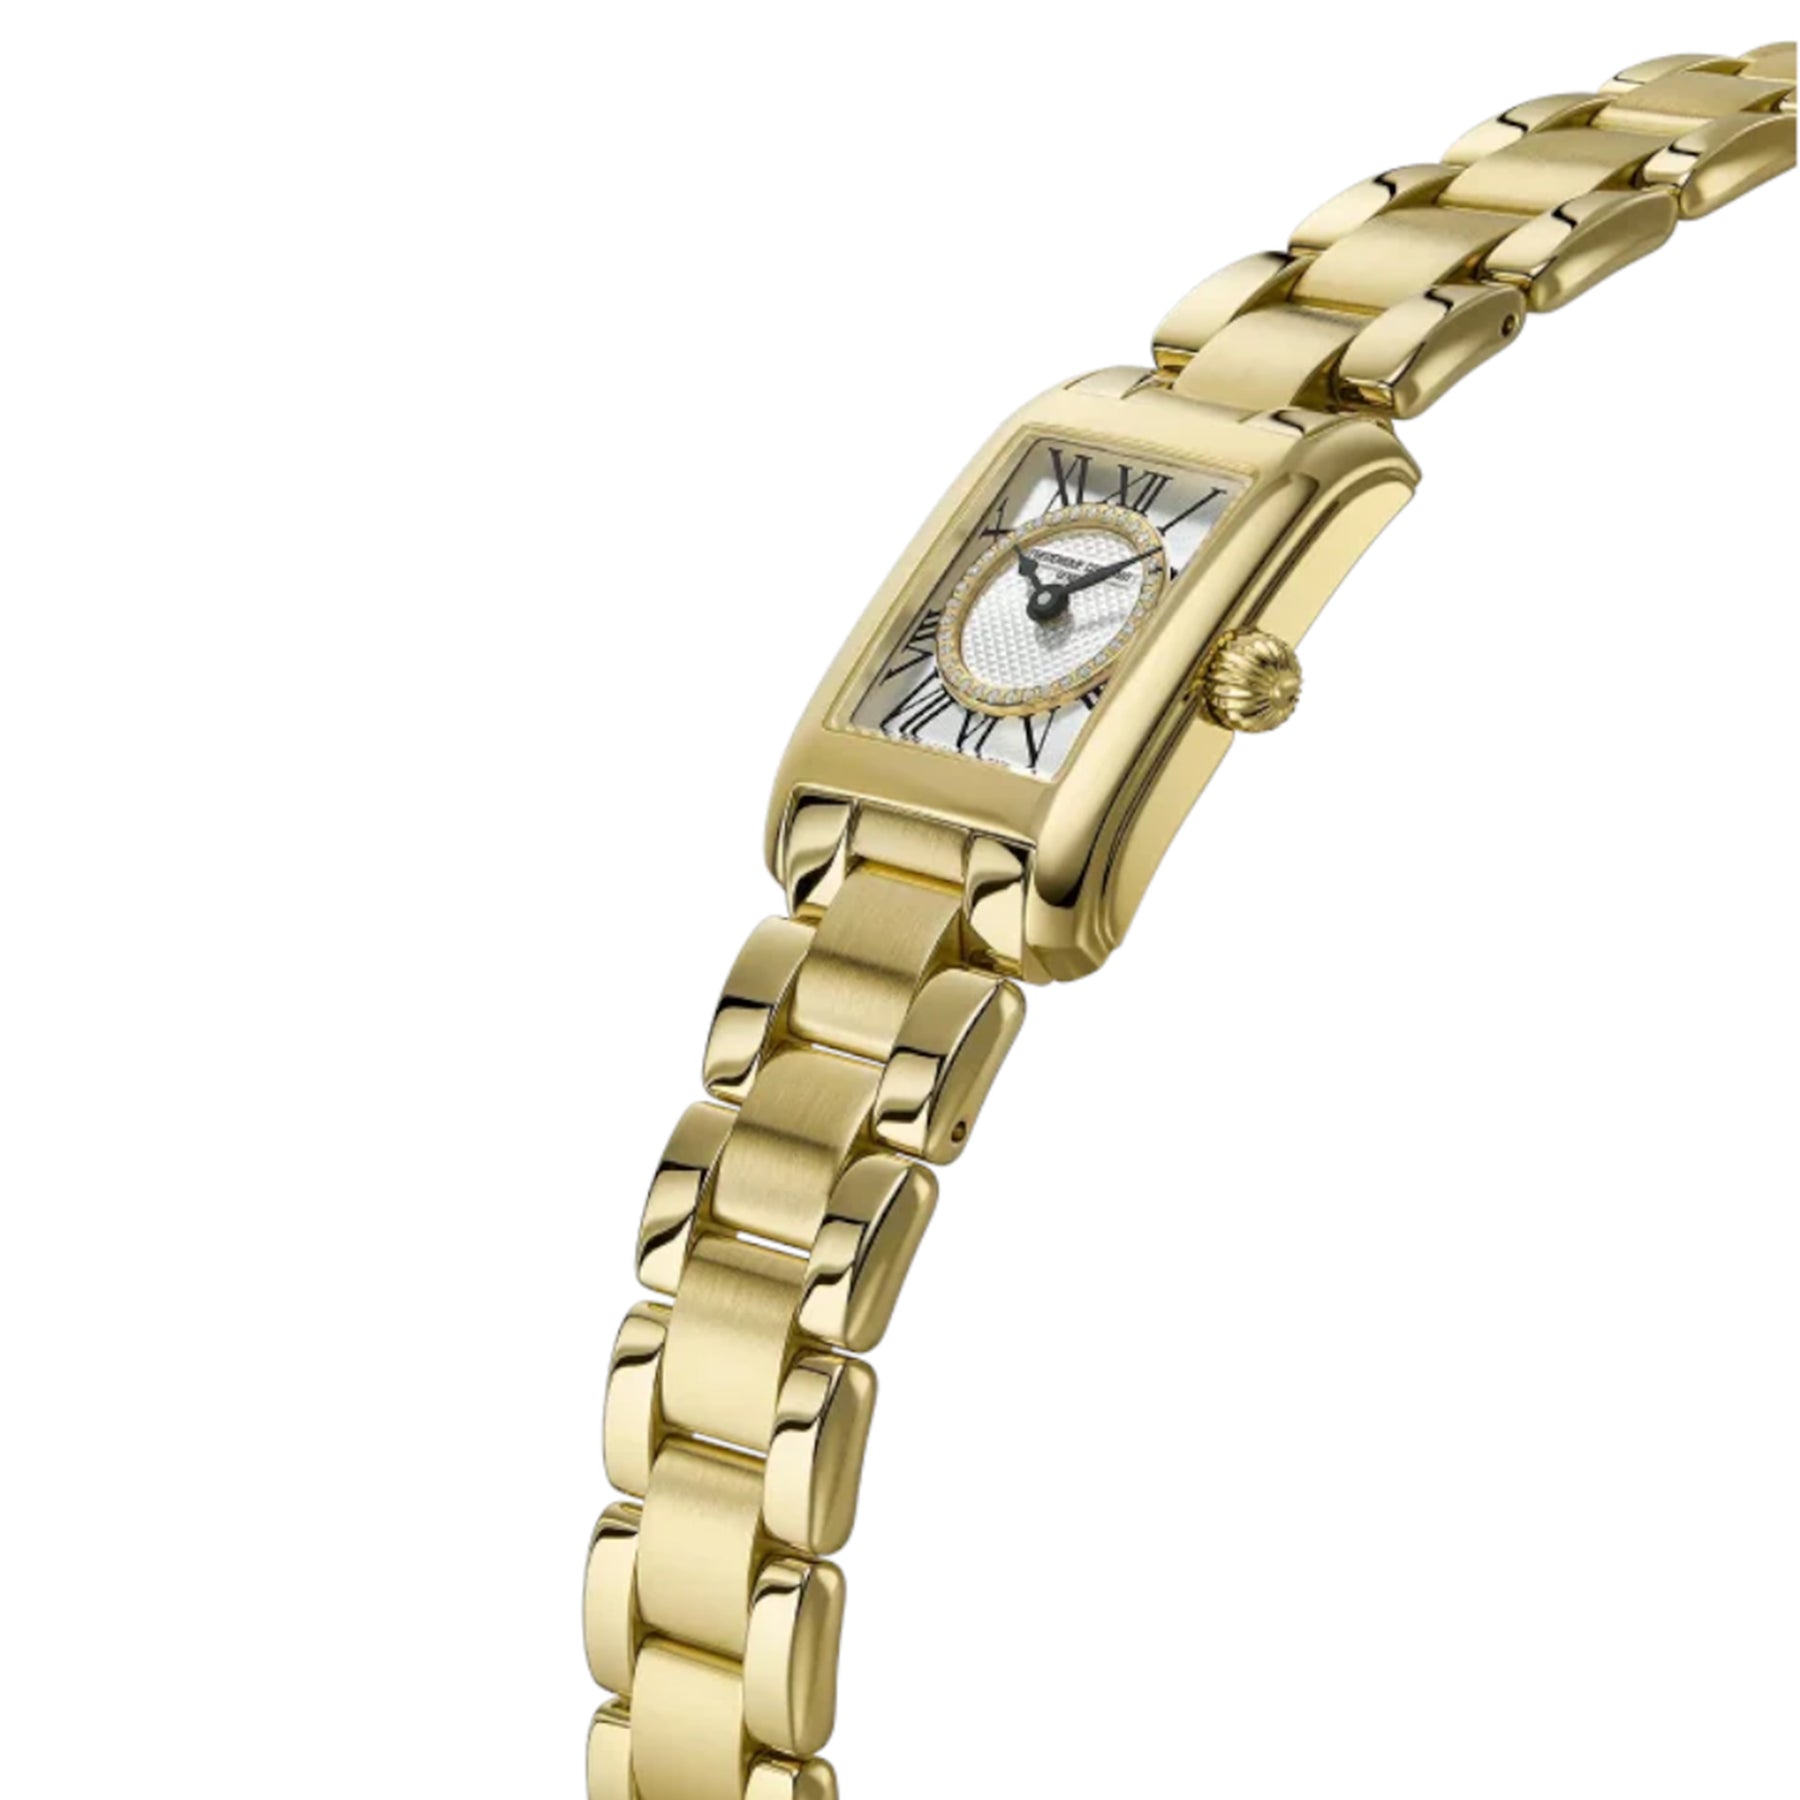 Frederique Constant Women's 34mm Gold PVD Automatic Watch FC-200MCDC25B